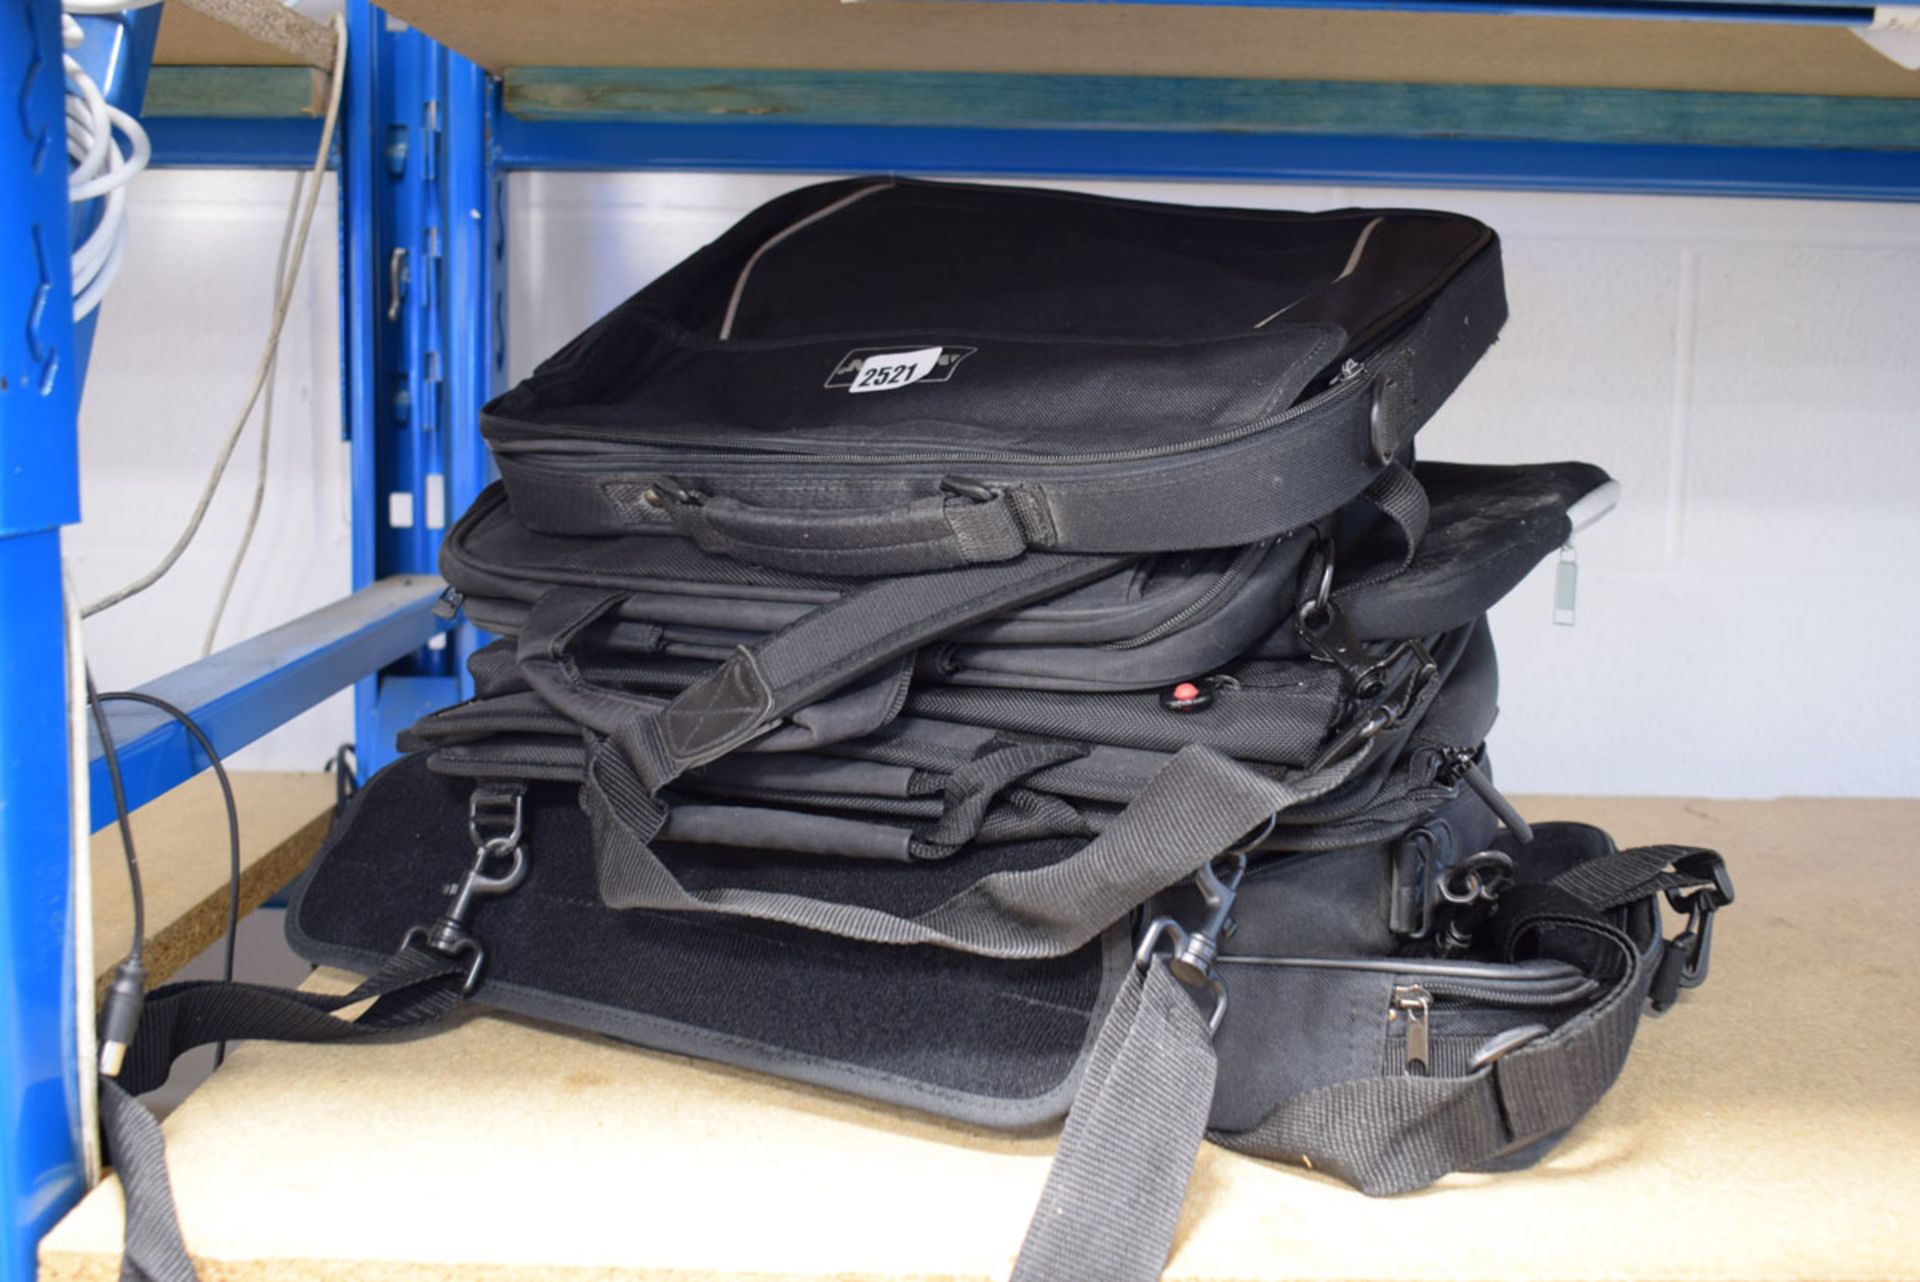 Quantity of used laptop bags